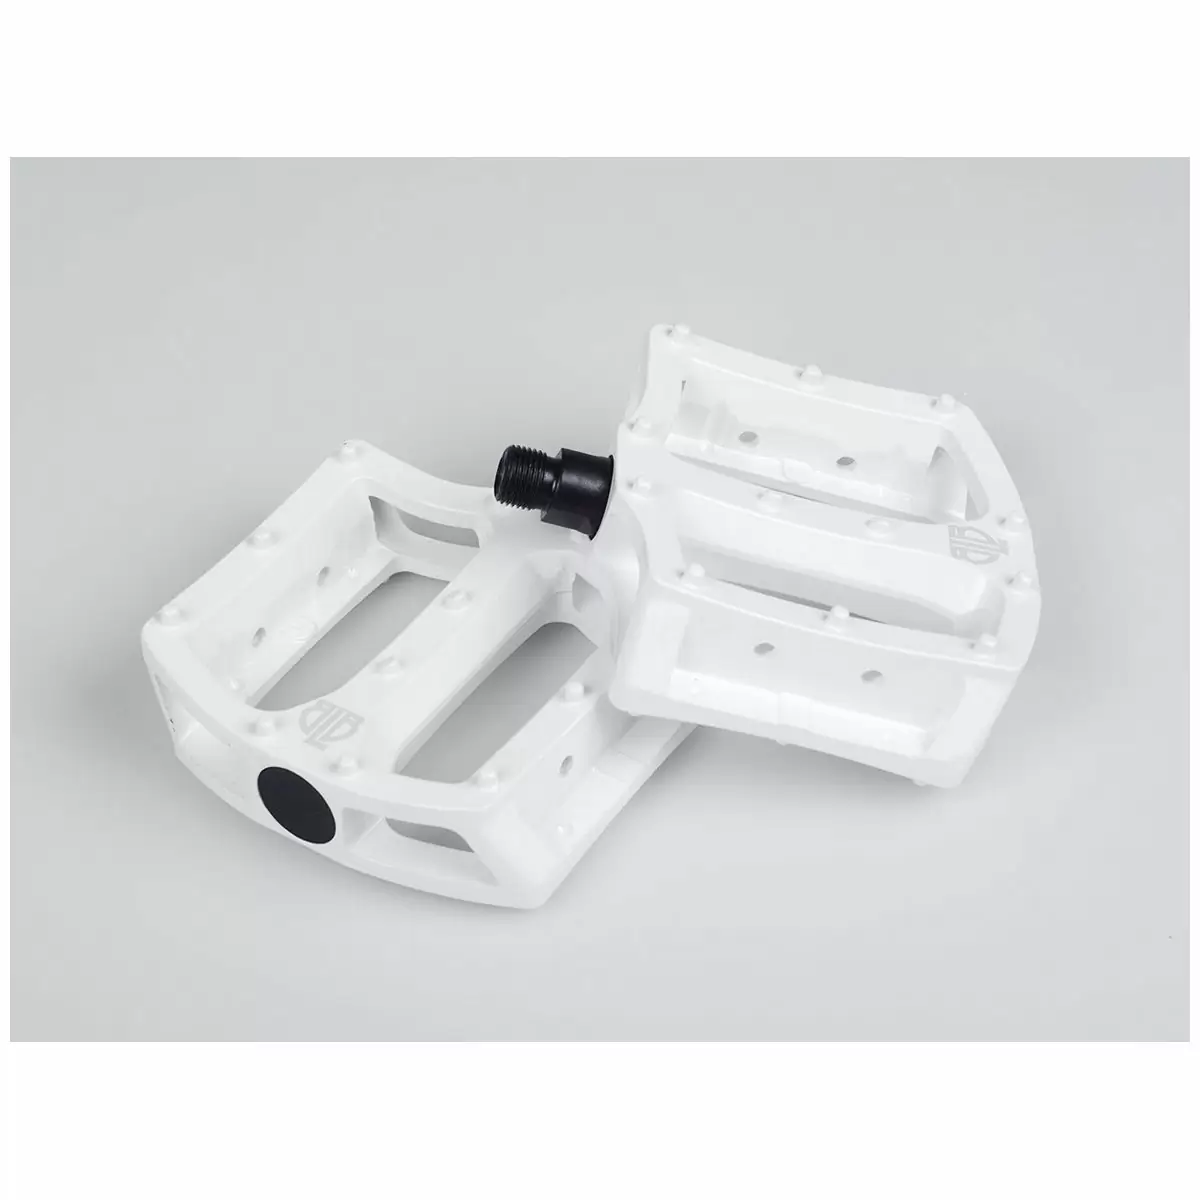 Pair freestyle pedals white - image